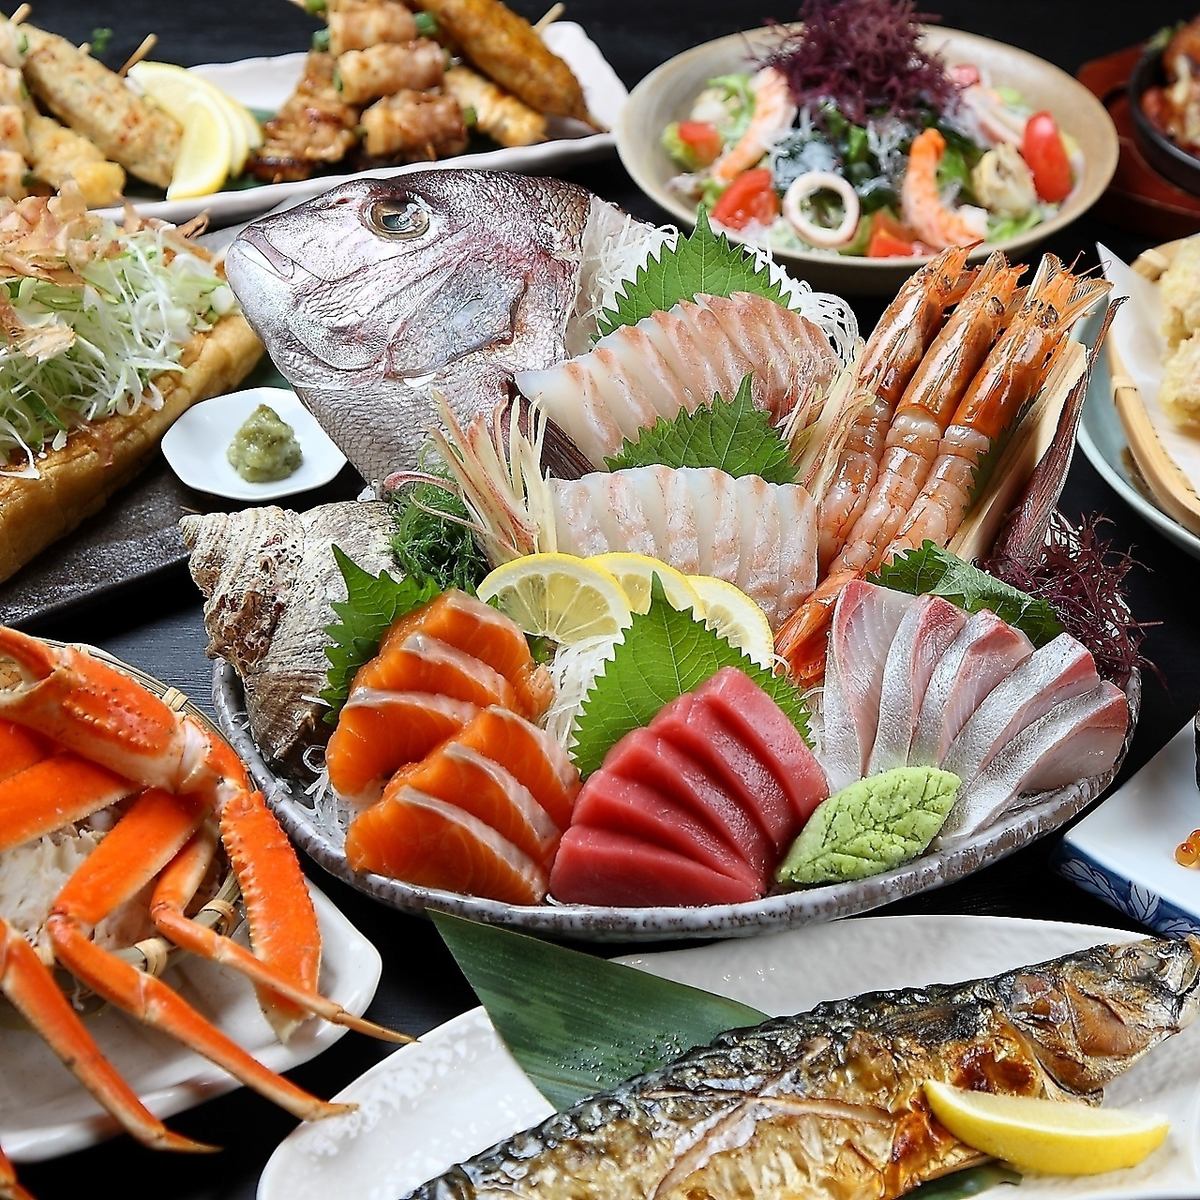 The fresh fish platter, which is particular about freshness and quality, is one of our prided dishes.